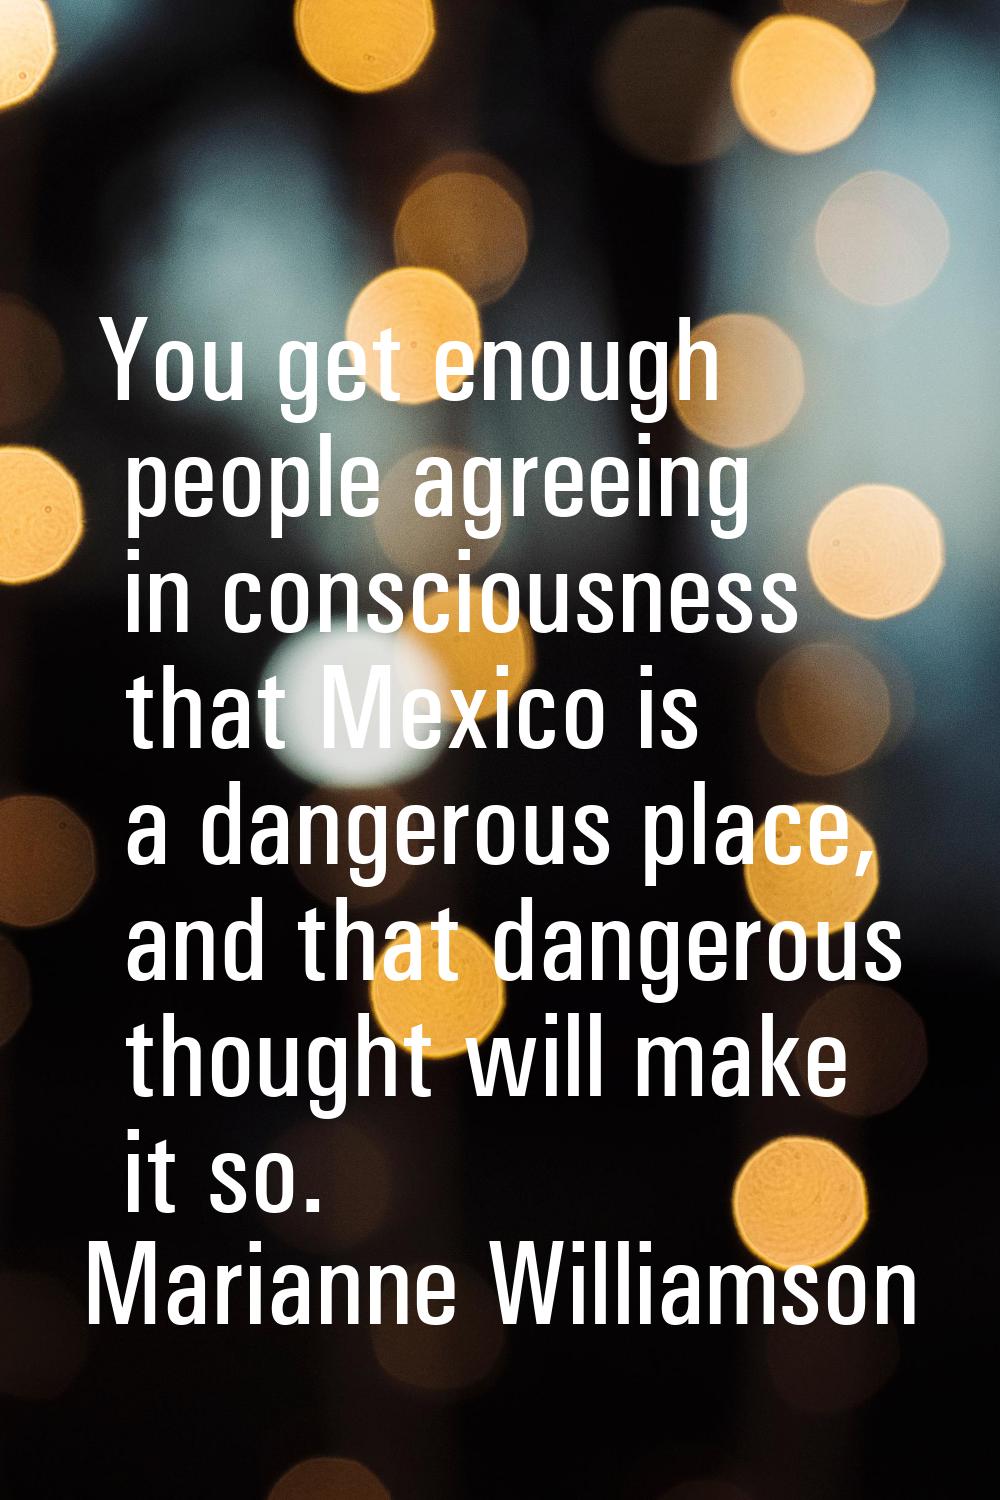 You get enough people agreeing in consciousness that Mexico is a dangerous place, and that dangerou